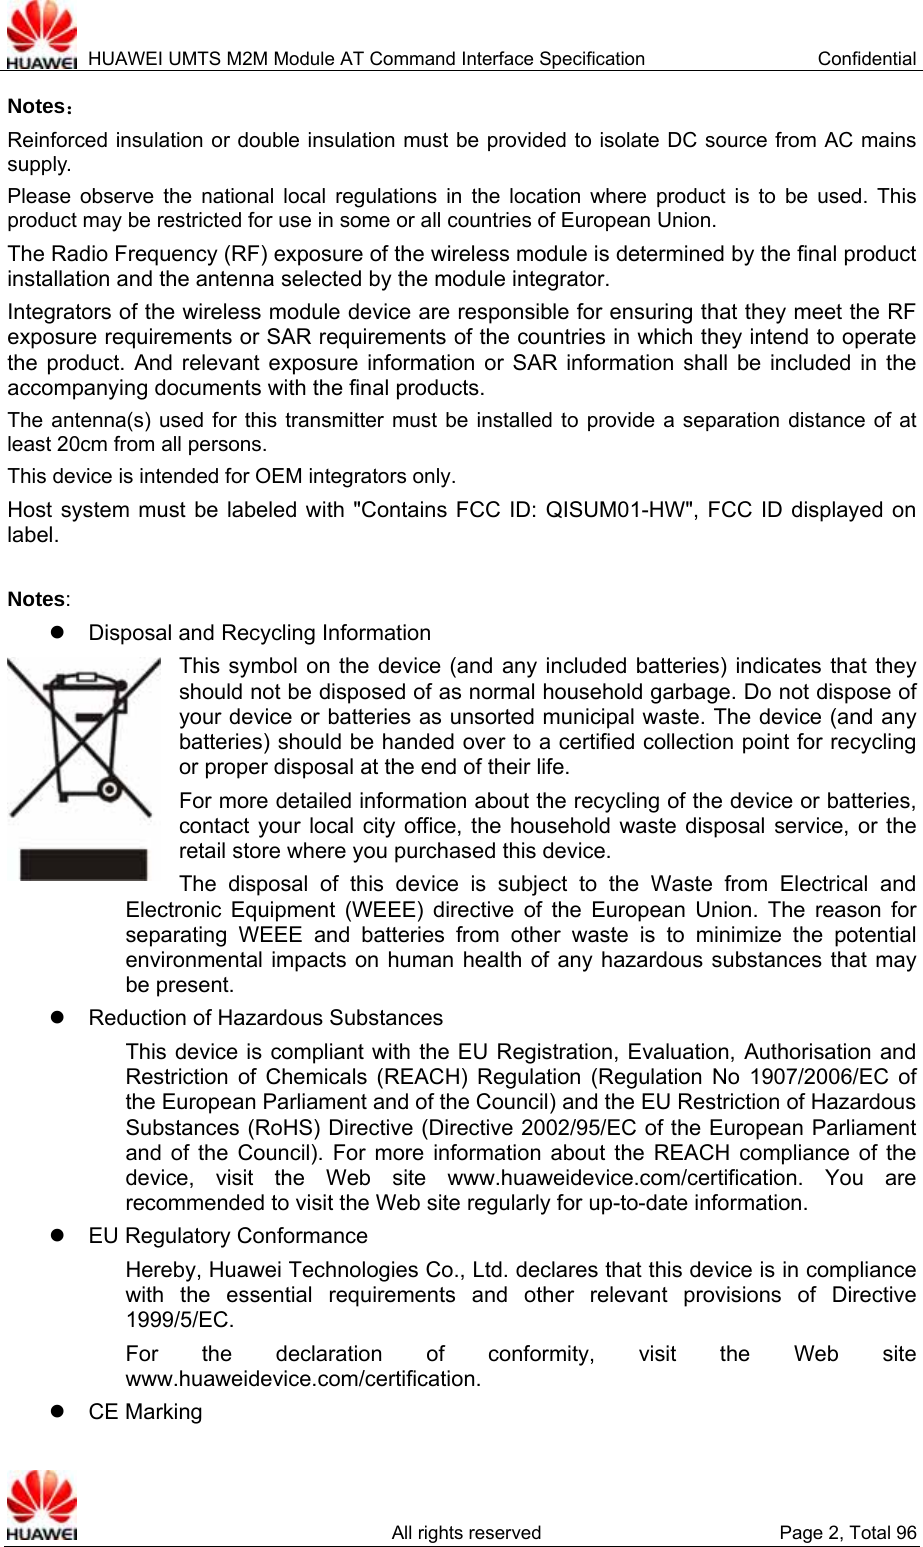  HUAWEI UMTS M2M Module AT Command Interface Specification  Confidential   All rights reserved  Page 2, Total 96 Notes： Reinforced insulation or double insulation must be provided to isolate DC source from AC mains supply. Please observe the national local regulations in the location where product is to be used. This product may be restricted for use in some or all countries of European Union. The Radio Frequency (RF) exposure of the wireless module is determined by the final product installation and the antenna selected by the module integrator. Integrators of the wireless module device are responsible for ensuring that they meet the RF exposure requirements or SAR requirements of the countries in which they intend to operate the product. And relevant exposure information or SAR information shall be included in the accompanying documents with the final products. The antenna(s) used for this transmitter must be installed to provide a separation distance of at least 20cm from all persons. This device is intended for OEM integrators only. Host system must be labeled with &quot;Contains FCC ID: QISUM01-HW&quot;, FCC ID displayed on label.  Notes: z  Disposal and Recycling Information This symbol on the device (and any included batteries) indicates that they should not be disposed of as normal household garbage. Do not dispose of your device or batteries as unsorted municipal waste. The device (and any batteries) should be handed over to a certified collection point for recycling or proper disposal at the end of their life.     For more detailed information about the recycling of the device or batteries, contact your local city office, the household waste disposal service, or the retail store where you purchased this device. The disposal of this device is subject to the Waste from Electrical and Electronic Equipment (WEEE) directive of the European Union. The reason for separating WEEE and batteries from other waste is to minimize the potential environmental impacts on human health of any hazardous substances that may be present. z  Reduction of Hazardous Substances This device is compliant with the EU Registration, Evaluation, Authorisation and Restriction of Chemicals (REACH) Regulation (Regulation No 1907/2006/EC of the European Parliament and of the Council) and the EU Restriction of Hazardous Substances (RoHS) Directive (Directive 2002/95/EC of the European Parliament and of the Council). For more information about the REACH compliance of the device, visit the Web site www.huaweidevice.com/certification. You are recommended to visit the Web site regularly for up-to-date information. z  EU Regulatory Conformance Hereby, Huawei Technologies Co., Ltd. declares that this device is in compliance with the essential requirements and other relevant provisions of Directive 1999/5/EC. For the declaration of conformity, visit the Web site www.huaweidevice.com/certification.   z CE Marking  